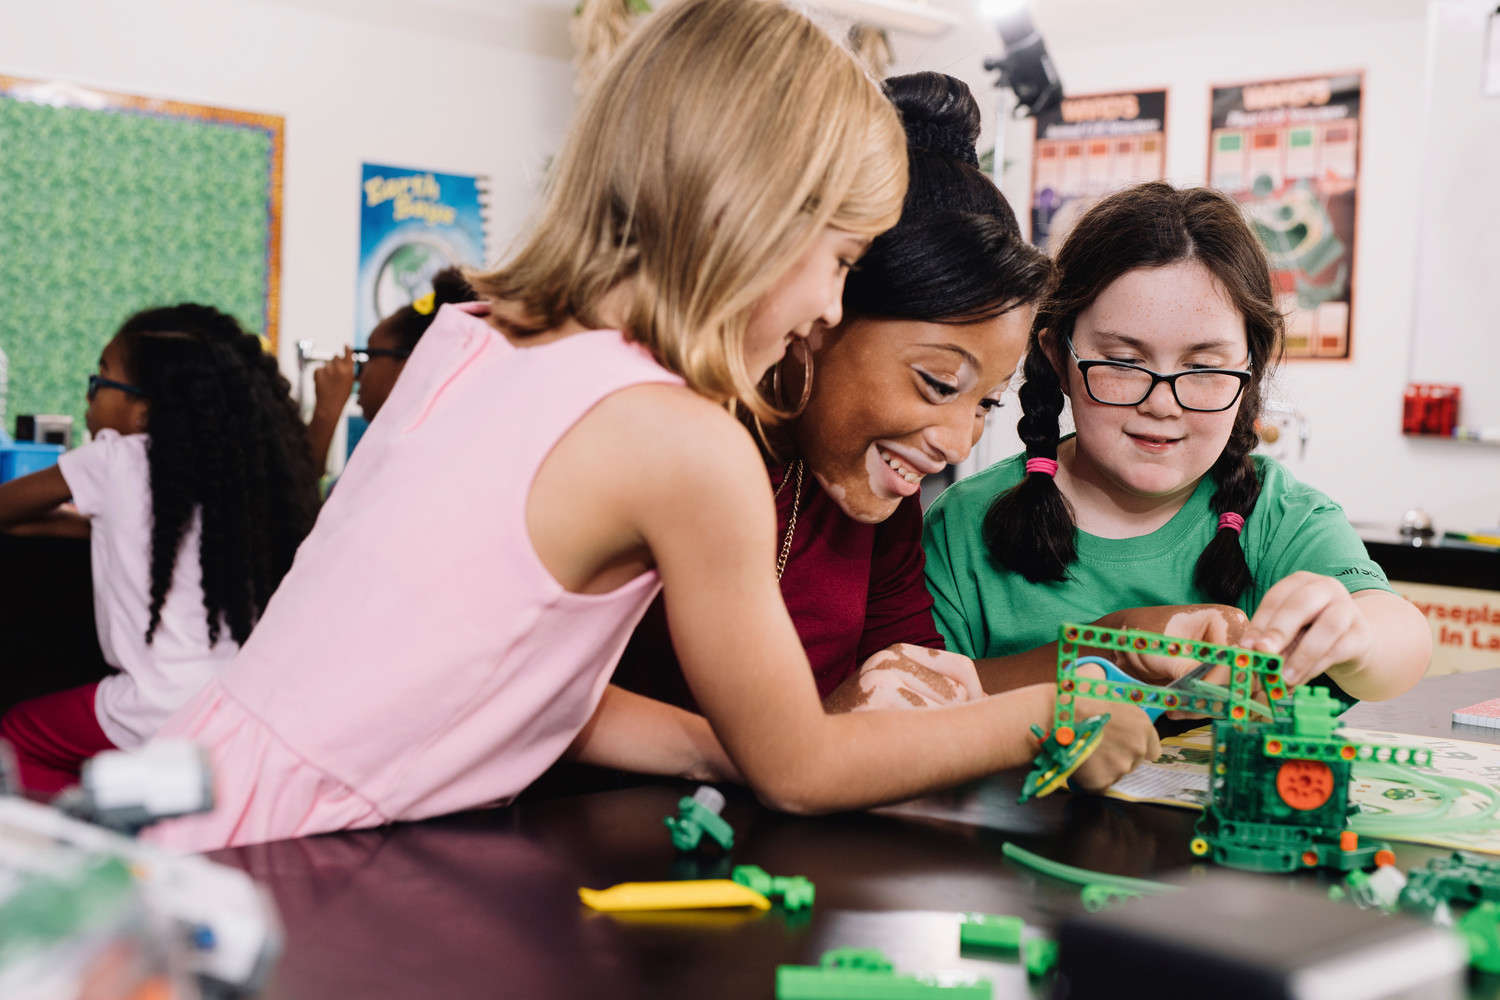 Girl Scouts has released 30 new badges exclusively for girls ages 5-18. Girls can now learn important life skills in cybersecurity, environmental advocacy, mechanical engineering, robotics, space exploration and more.